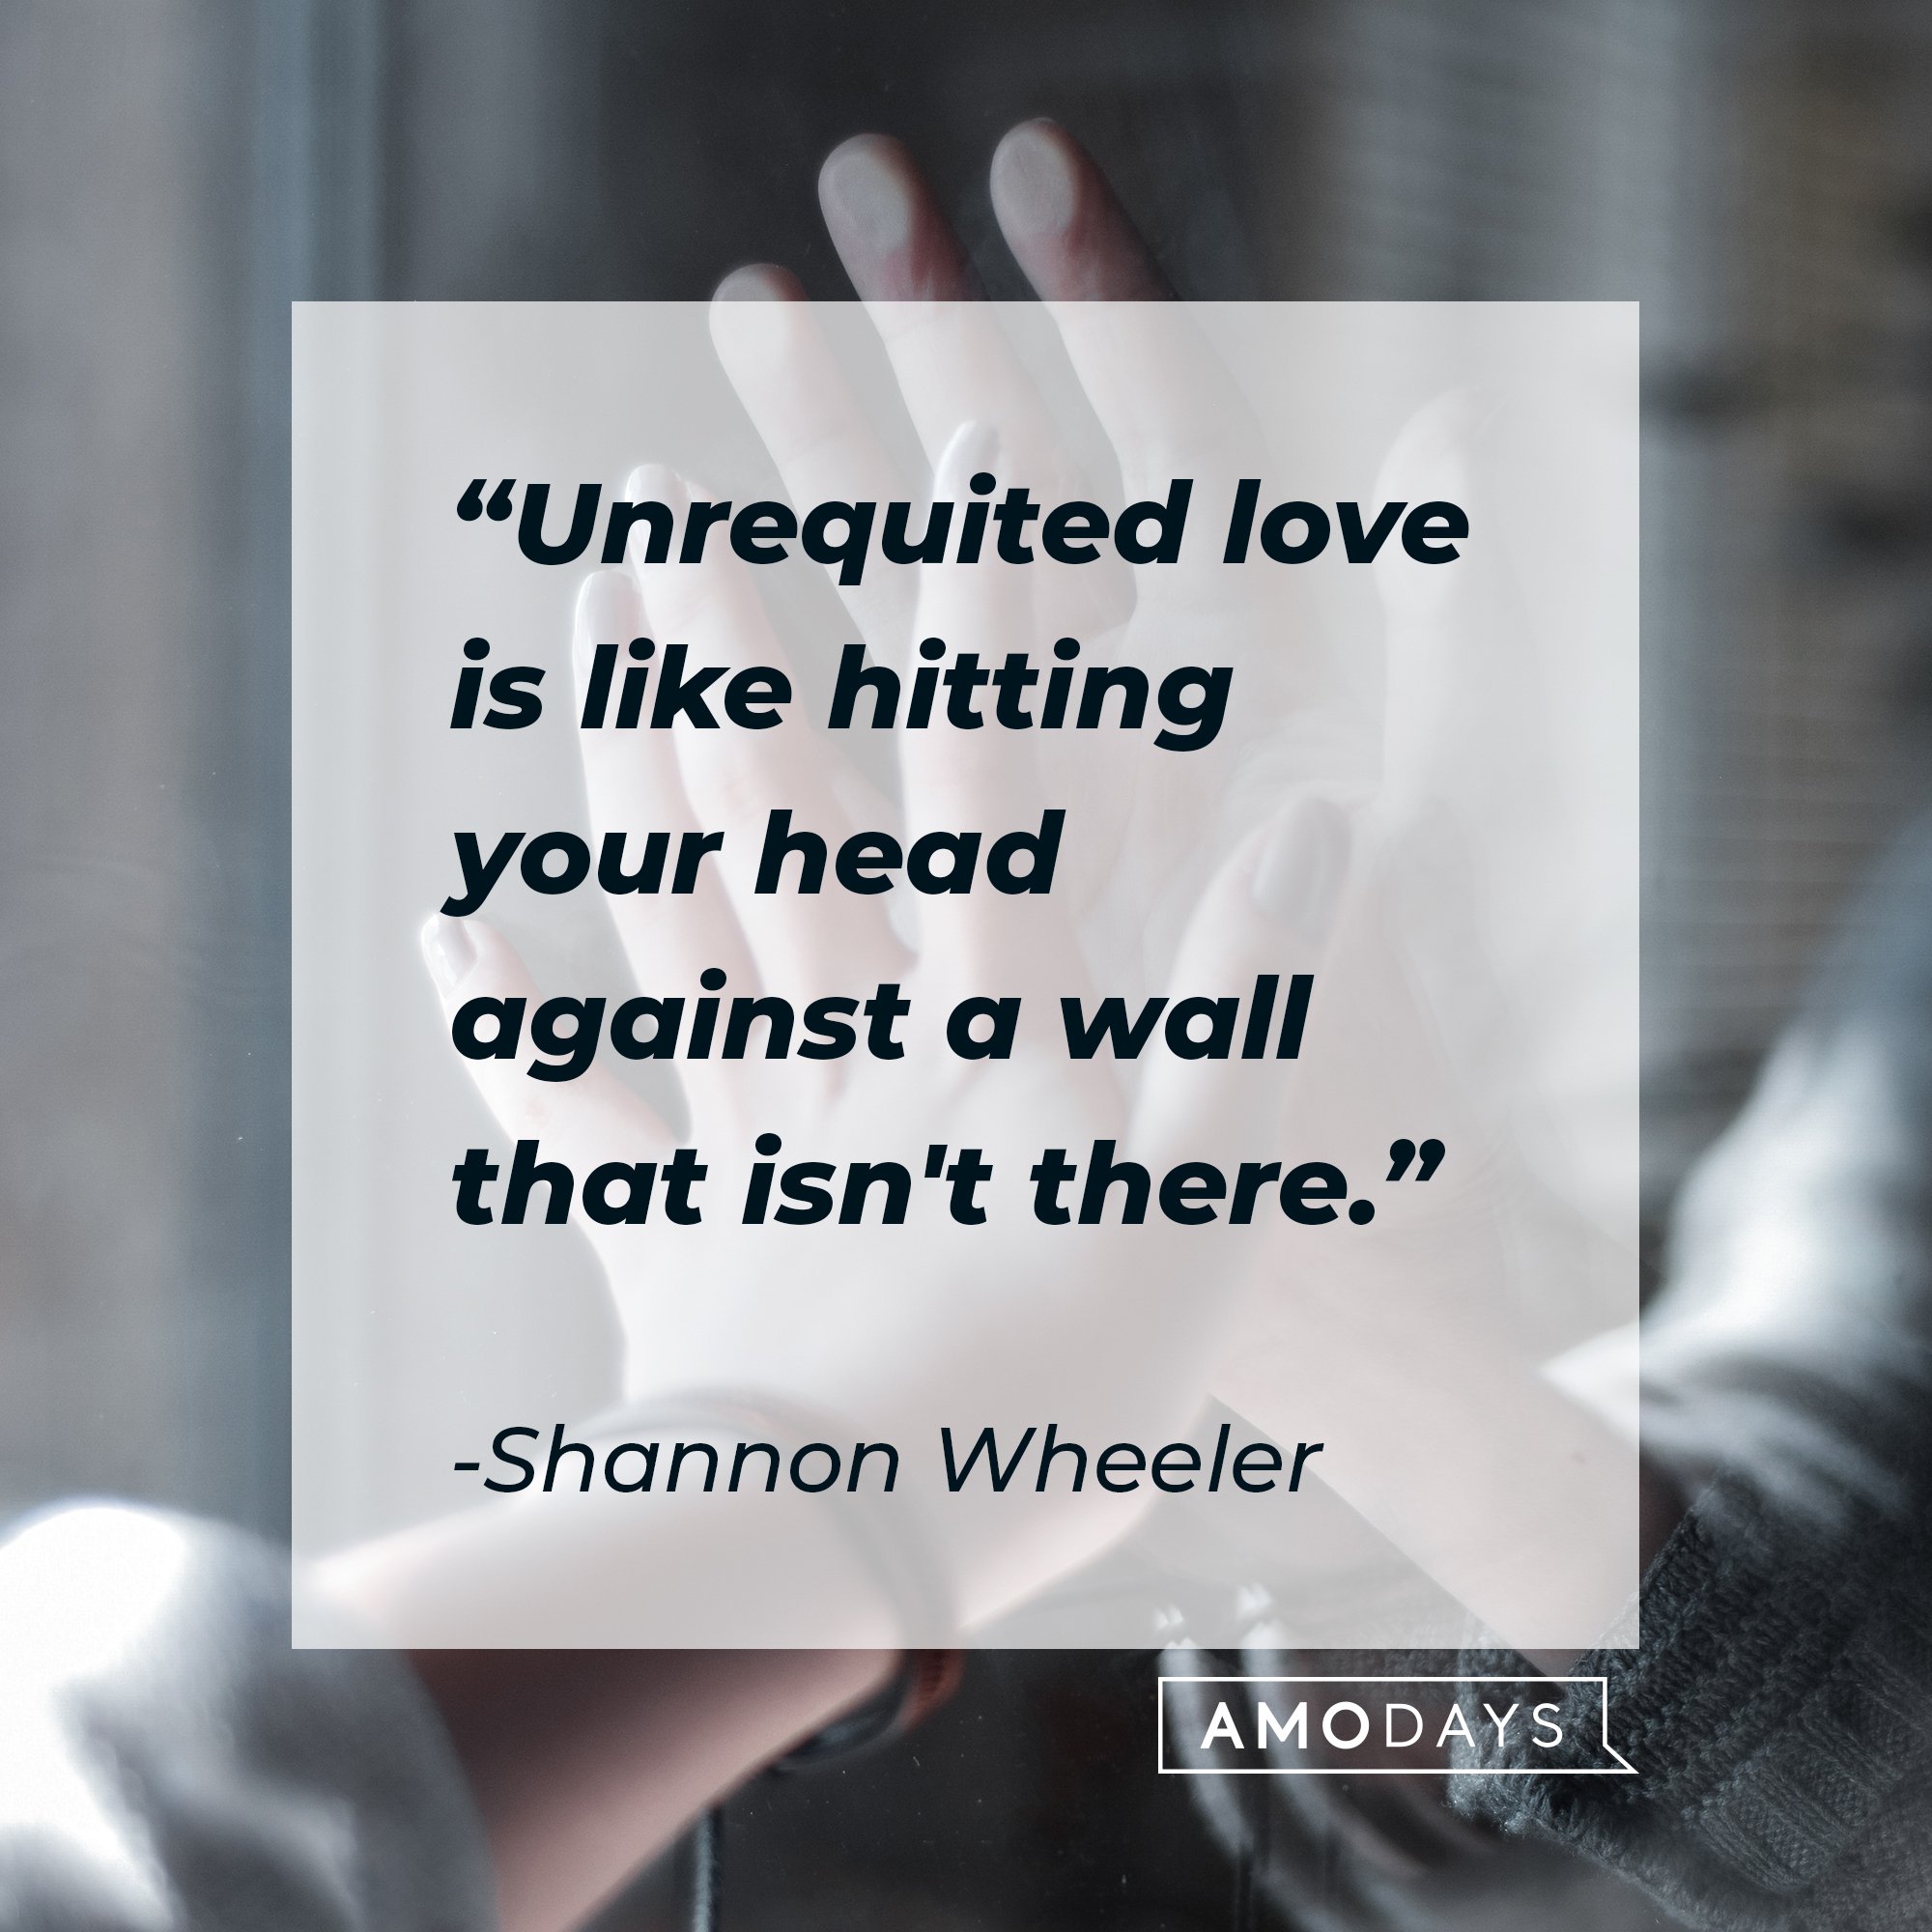 Shannon Wheeler's quote: "Unrequited love is like hitting your head against a wall that isn't there." | Image: AmoDays